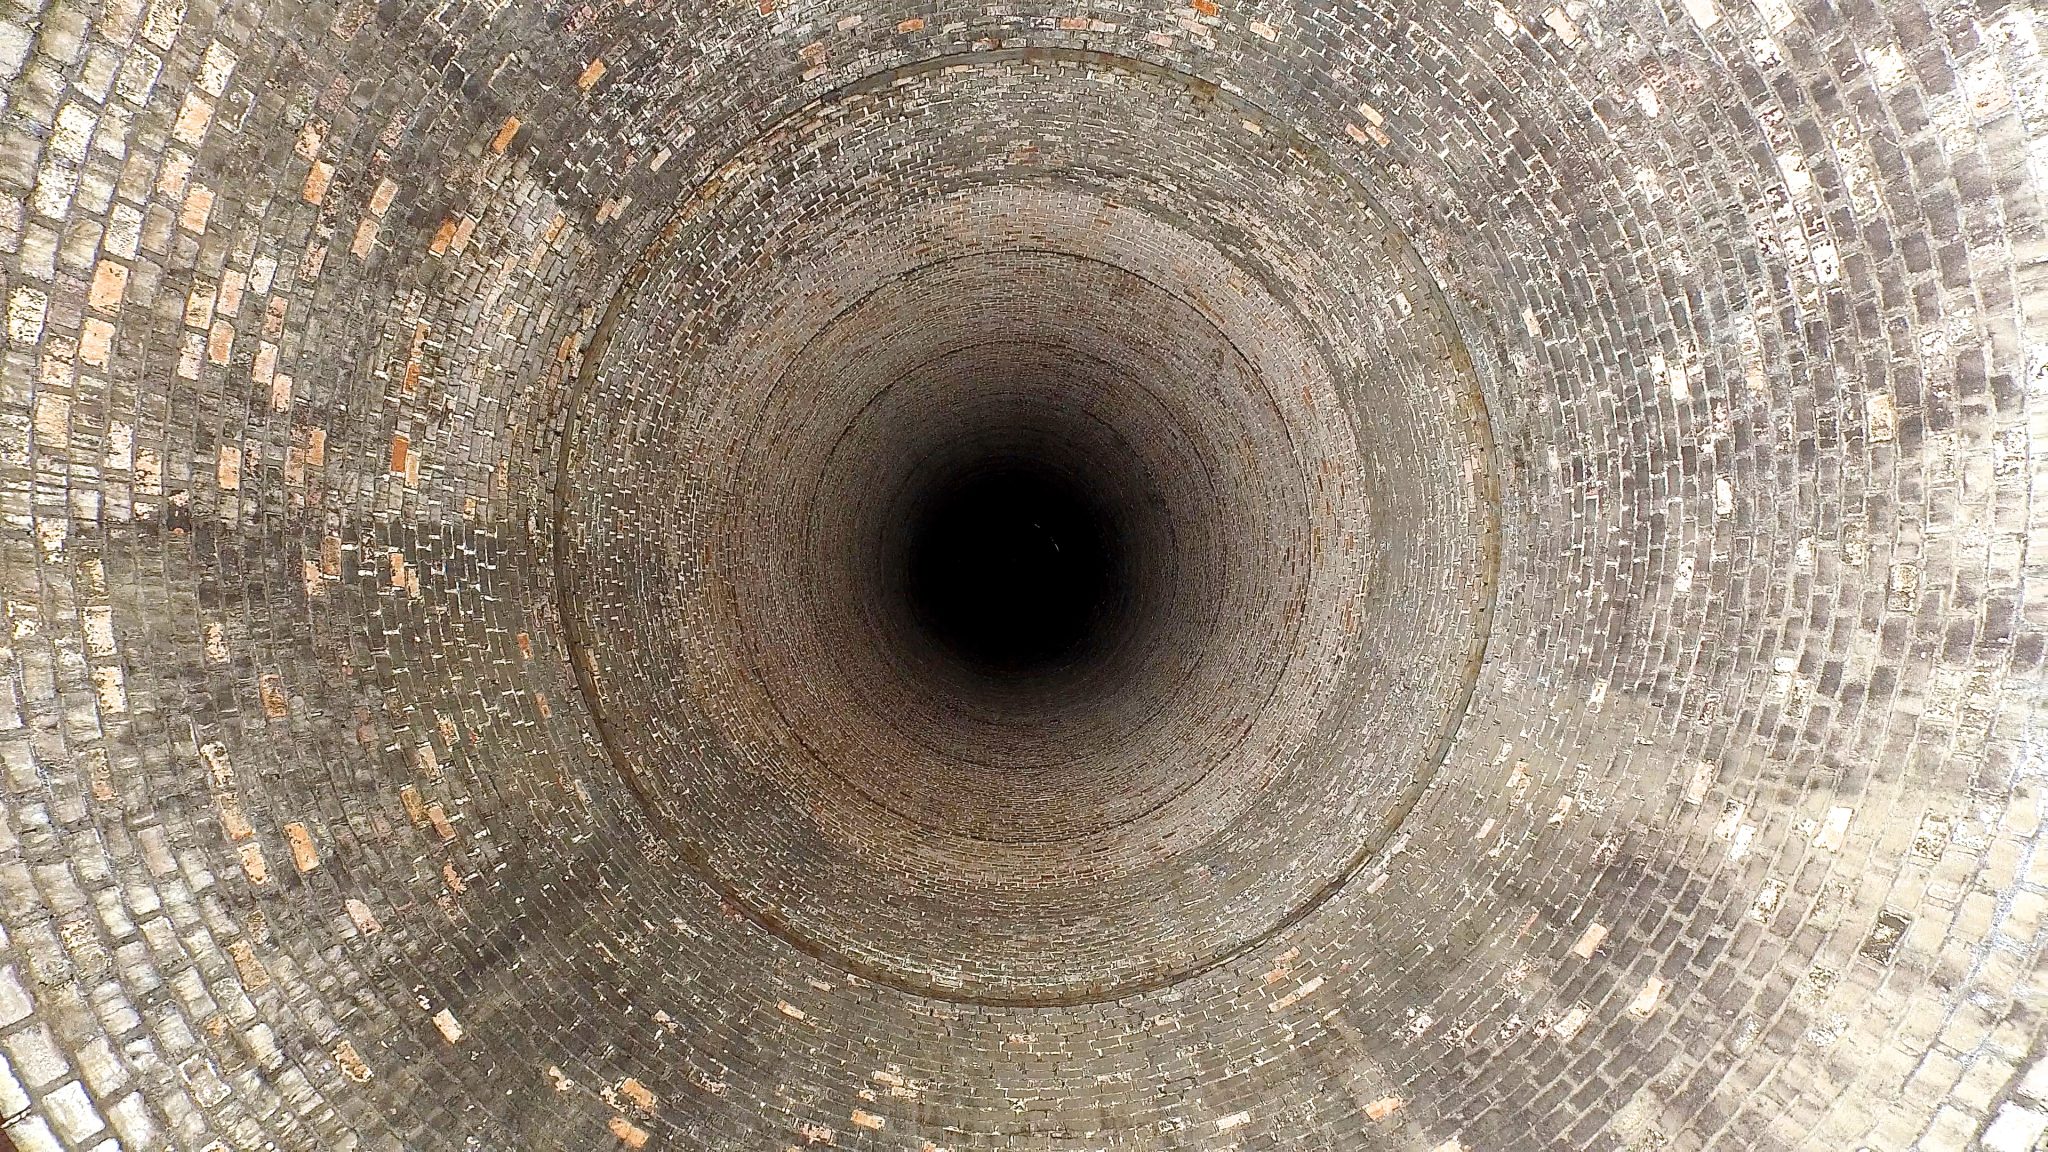 Looking down a disused power station chimney. Aerial drone footage.